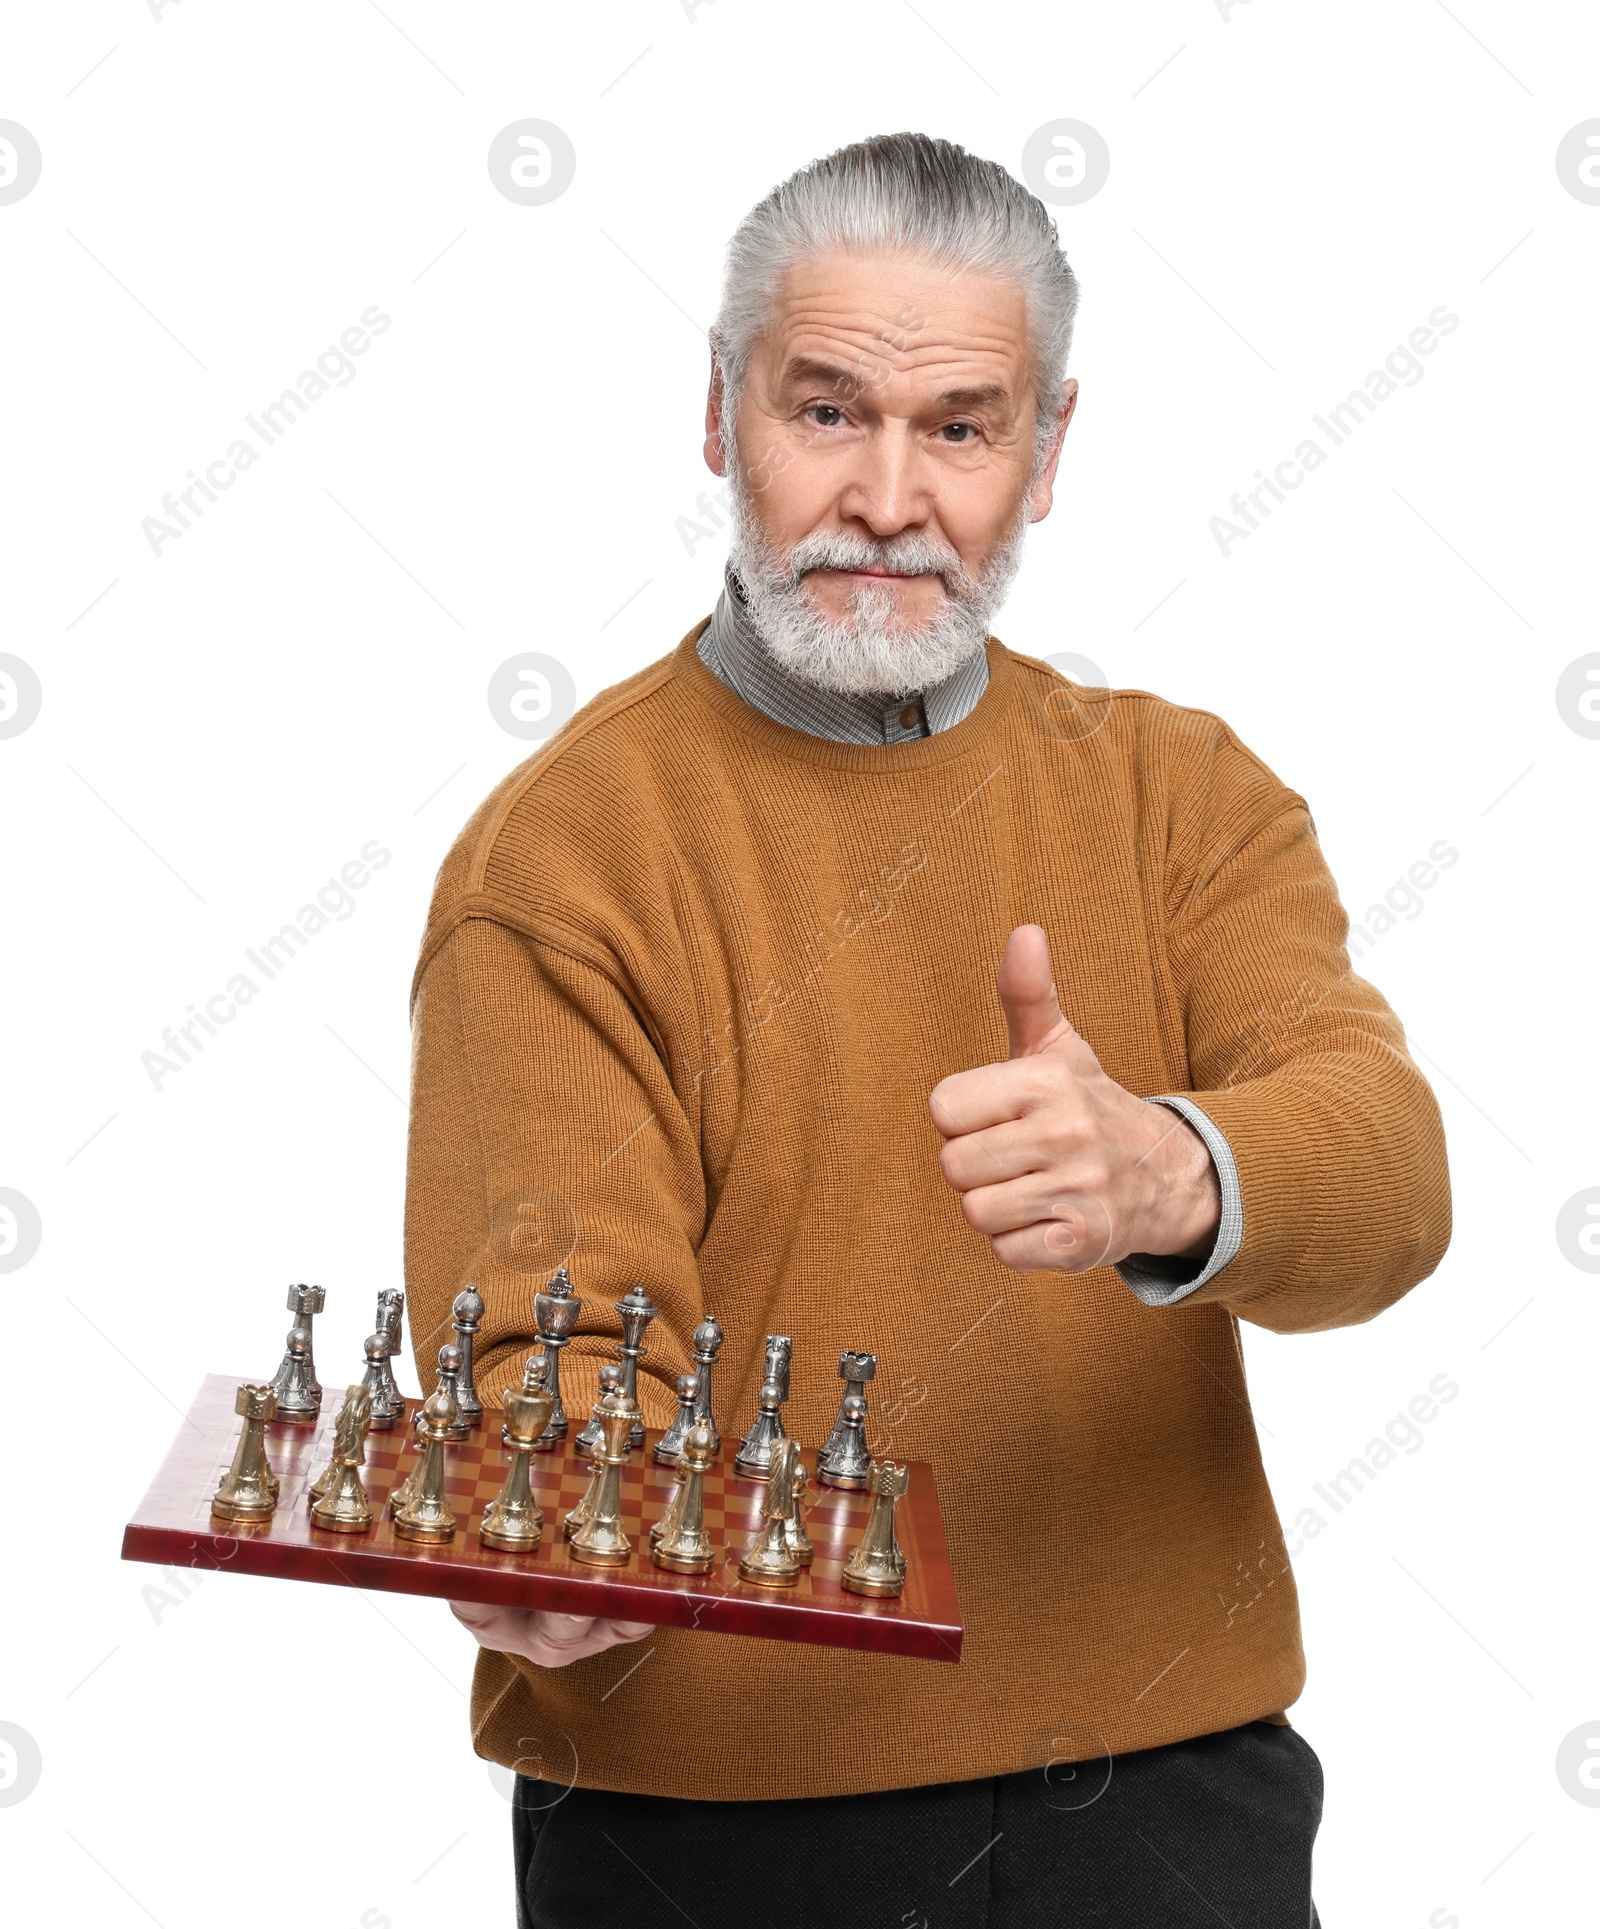 Photo of Man with chessboard and game pieces showing thumbs up on white background